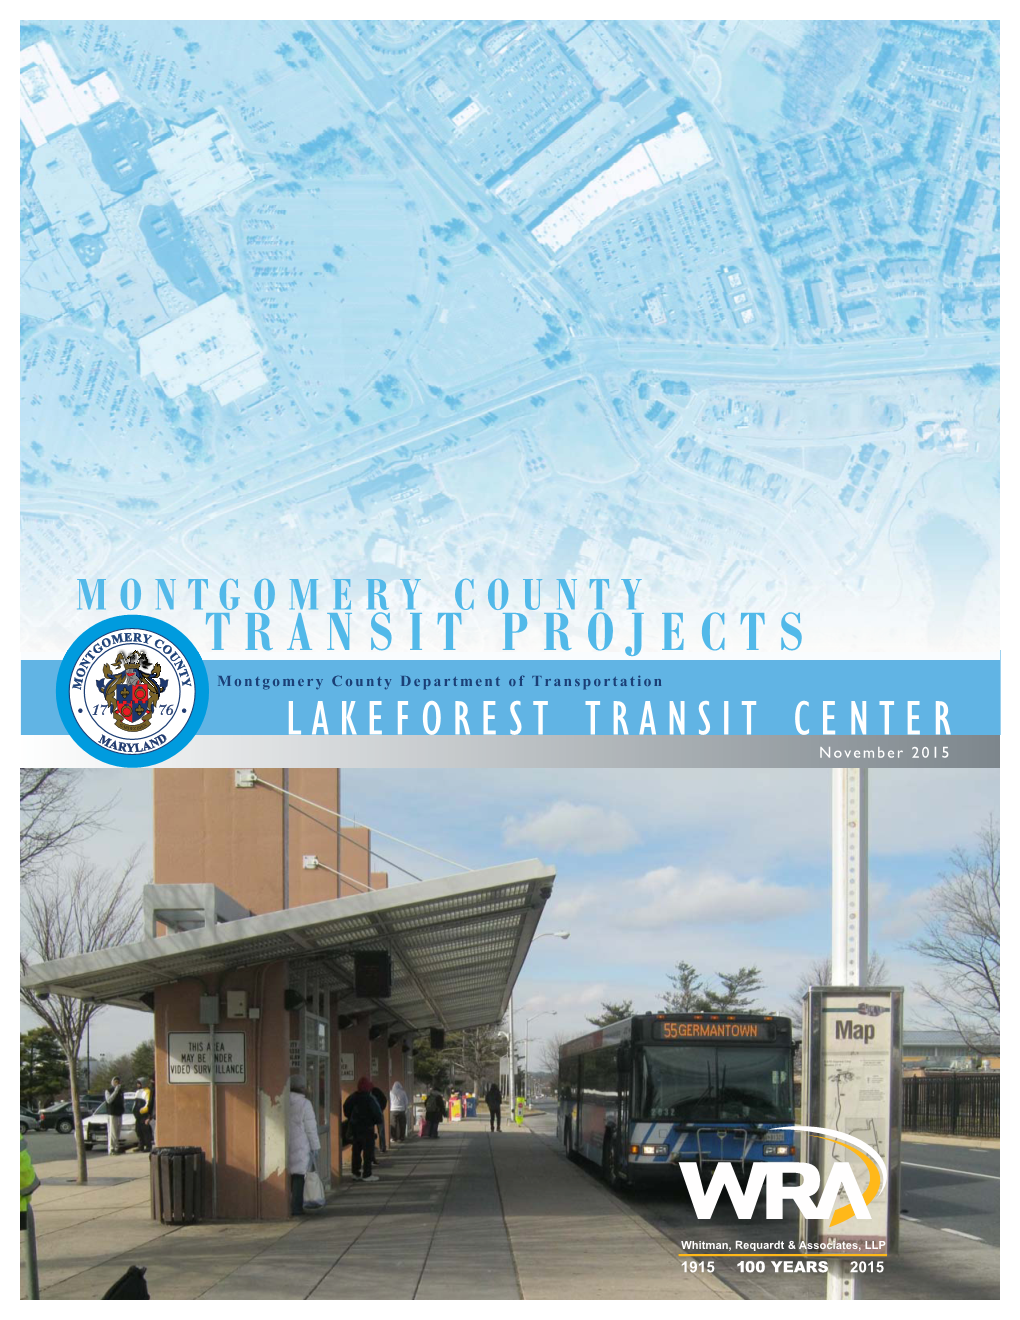 TRANSIT PROJECTS T N N T O Y Montgomery County Department of Transportation M 17 76 LAKEFOREST TRANSIT CENTER M D ARYLAN November 2015